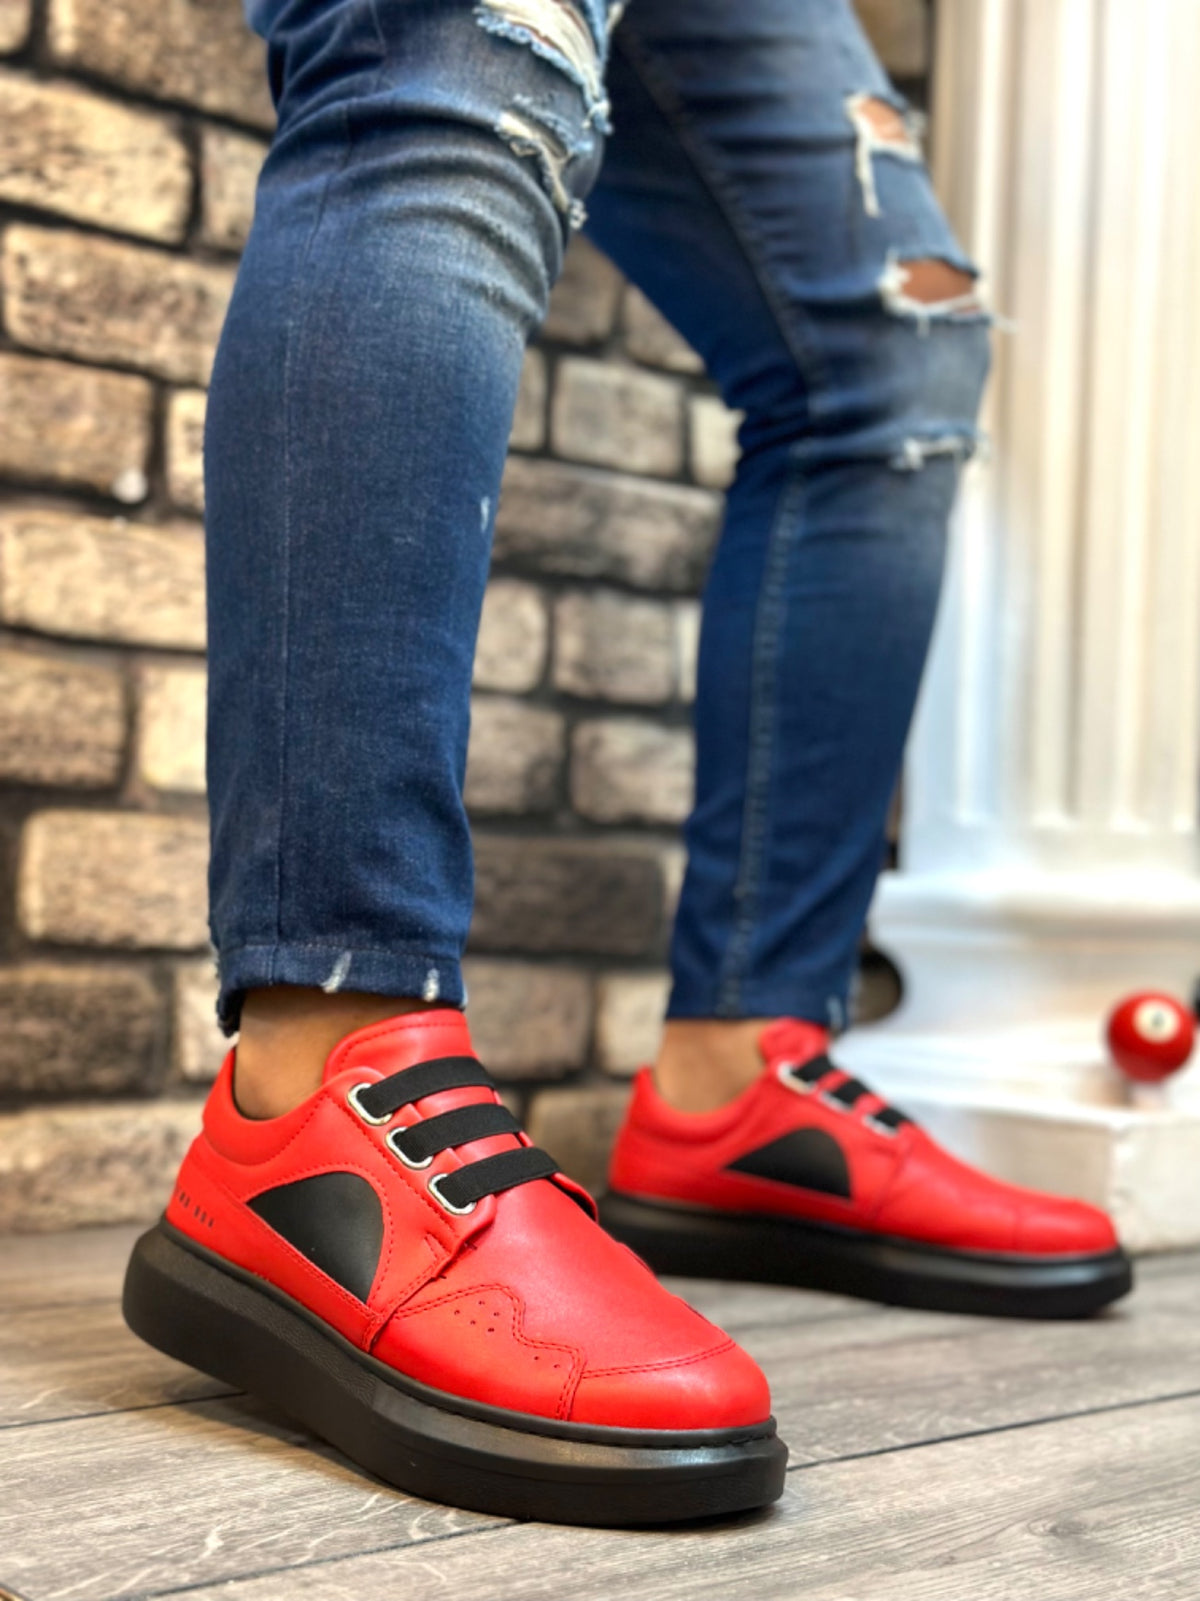 BA0302 Thick Sole Lace-Up Style Casual Red Black Men's Sneakers Shoes - STREETMODE™